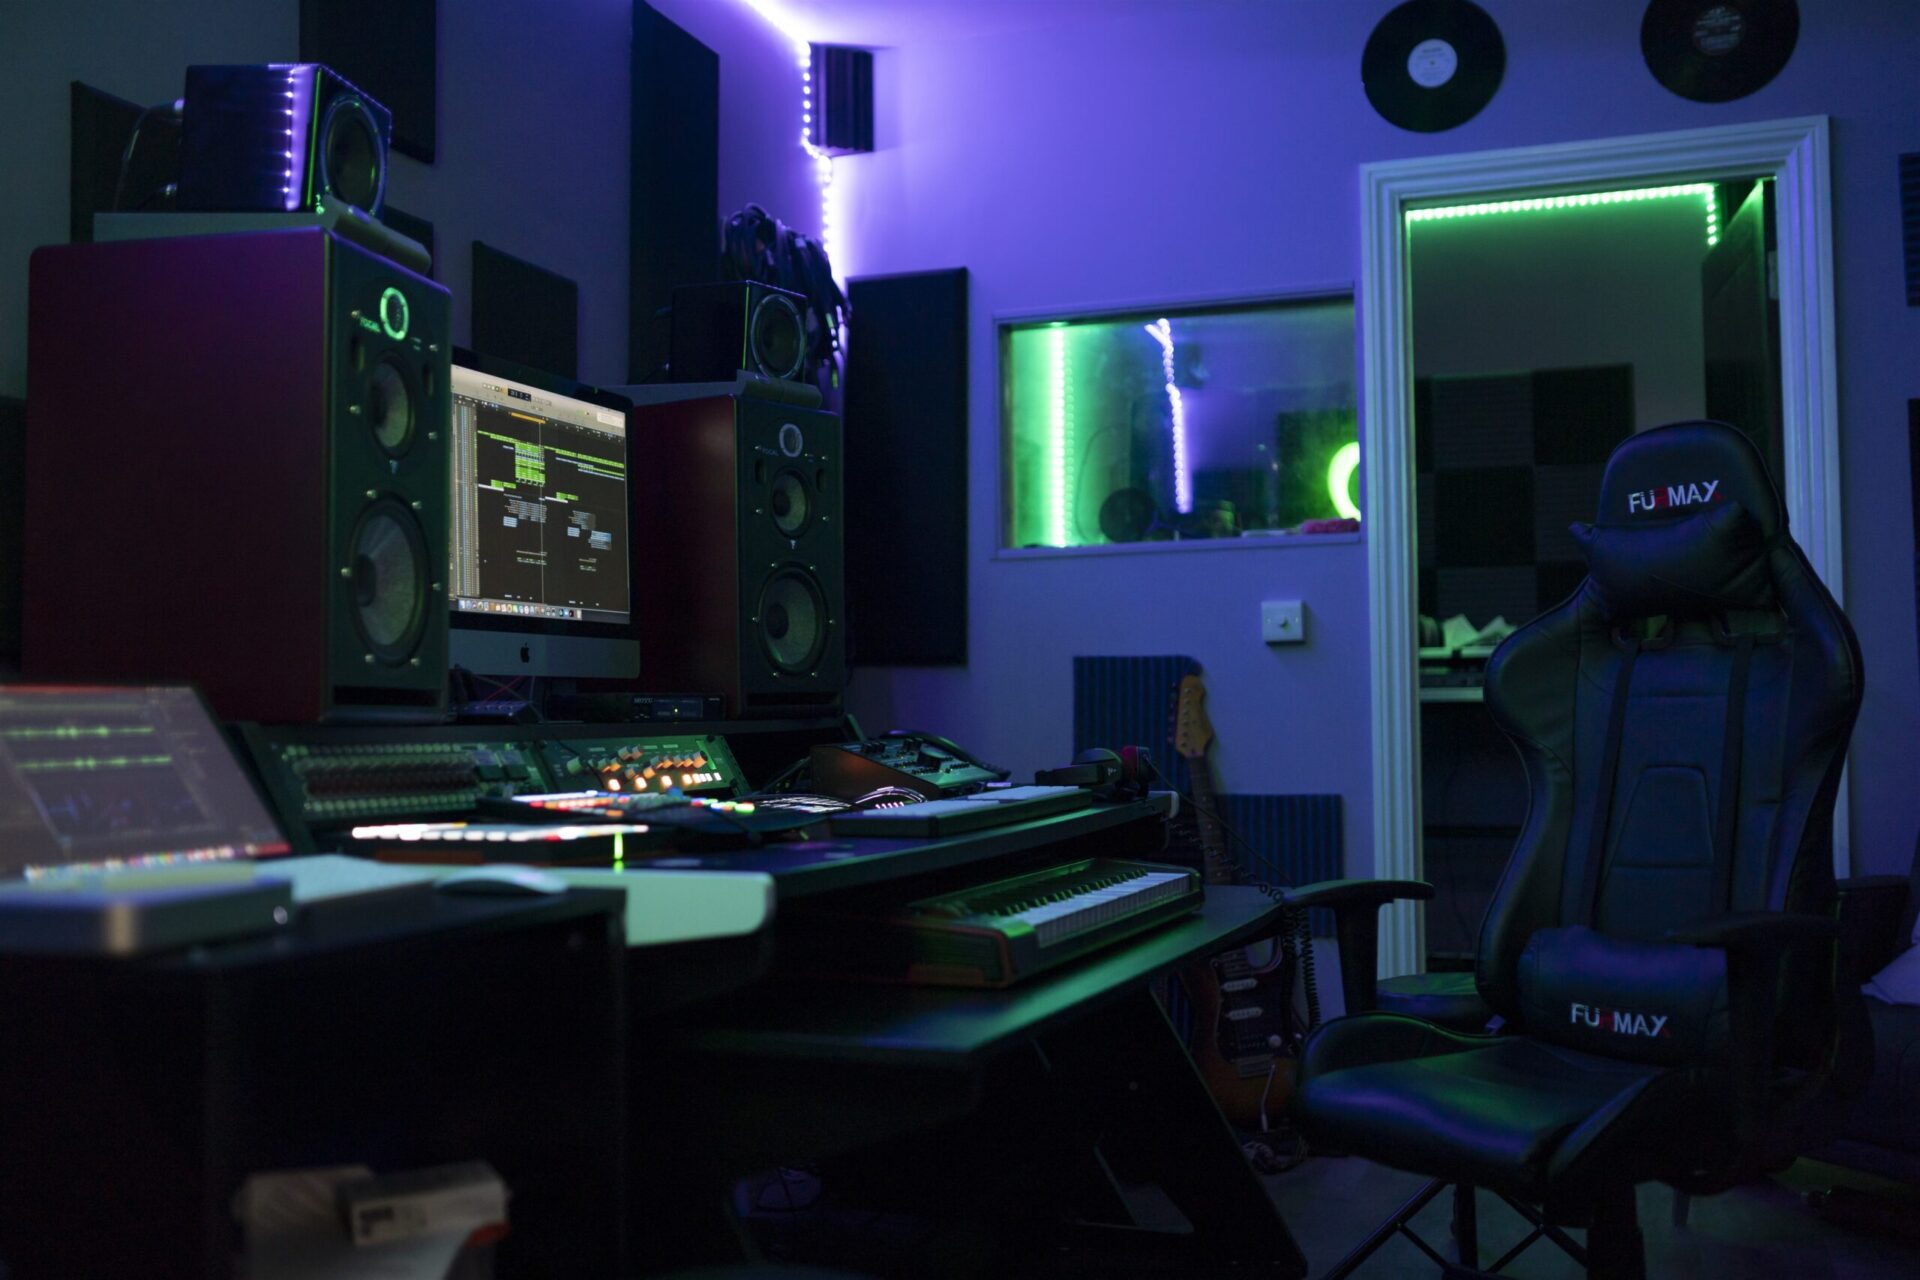 A music studio with a keyboard and speakers.